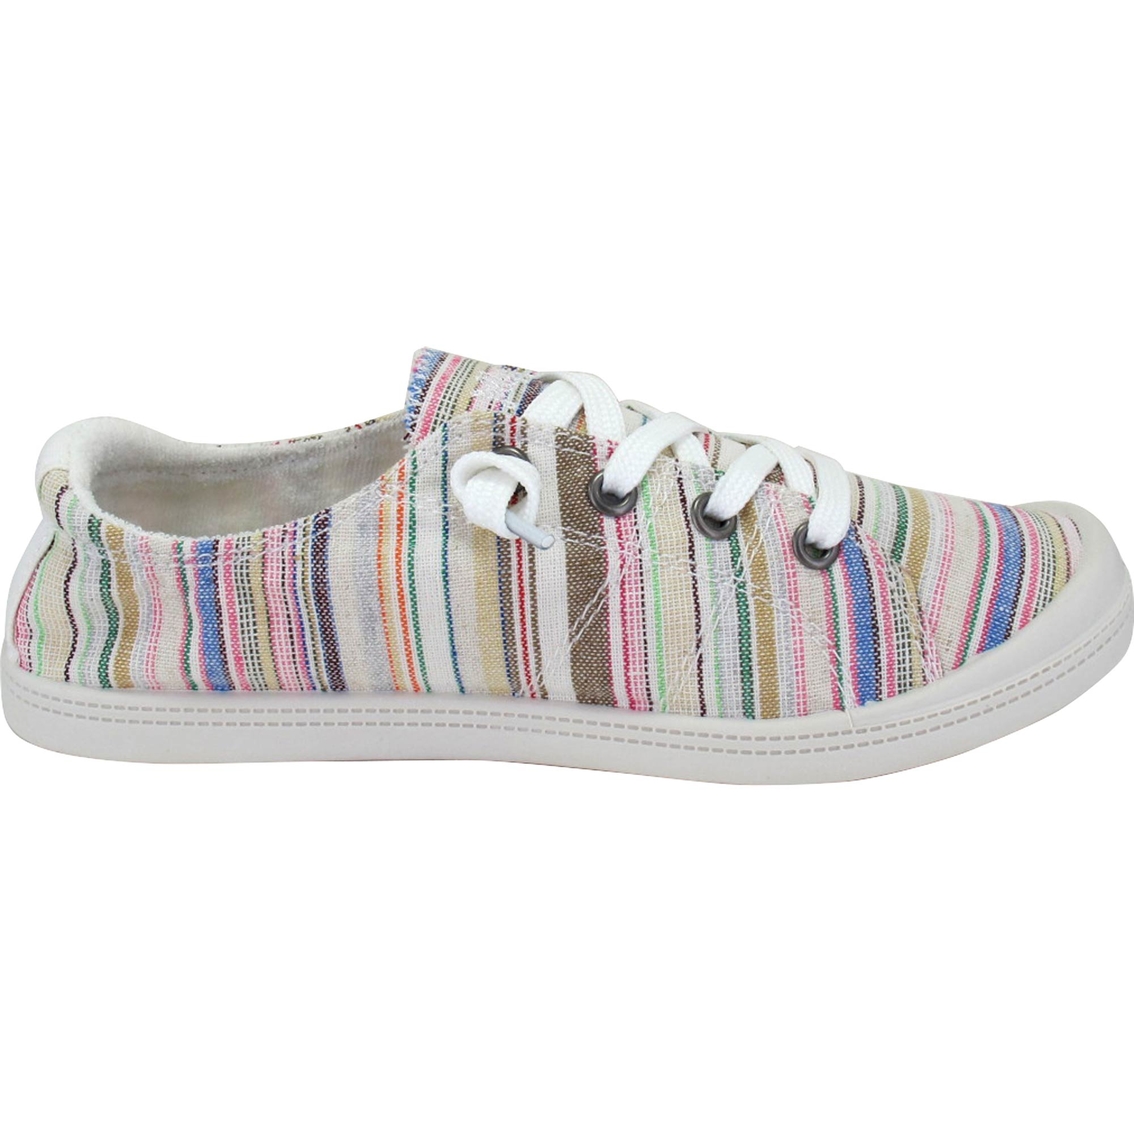 Jellypop Shoes Dallas Sneakers | Sneakers | Shoes | Shop The Exchange